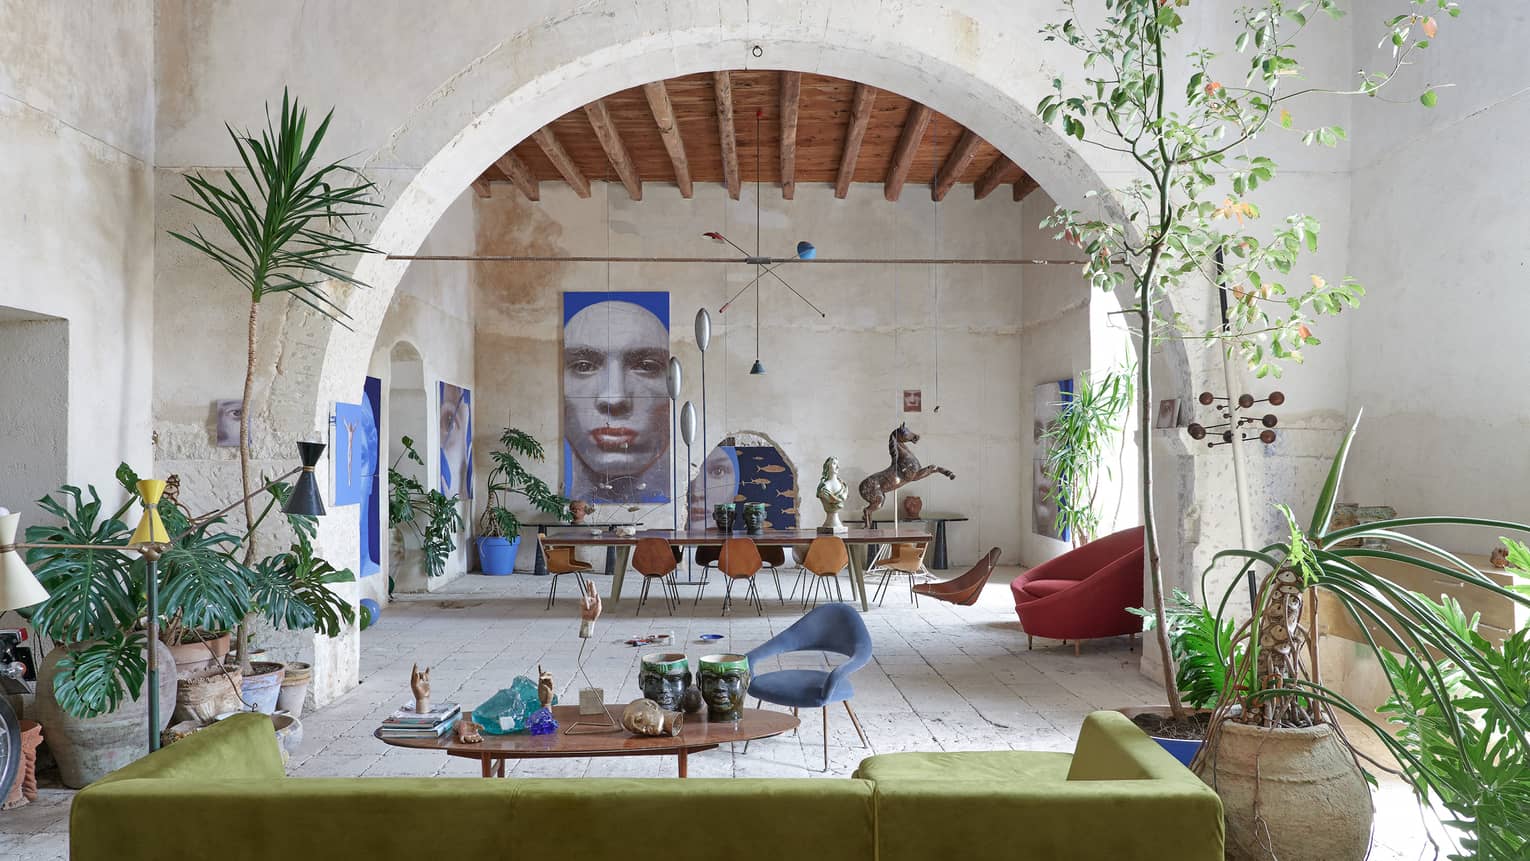 Large room with tropical plants, contemporary furnishings, an arched stone wall and artwork in the distance